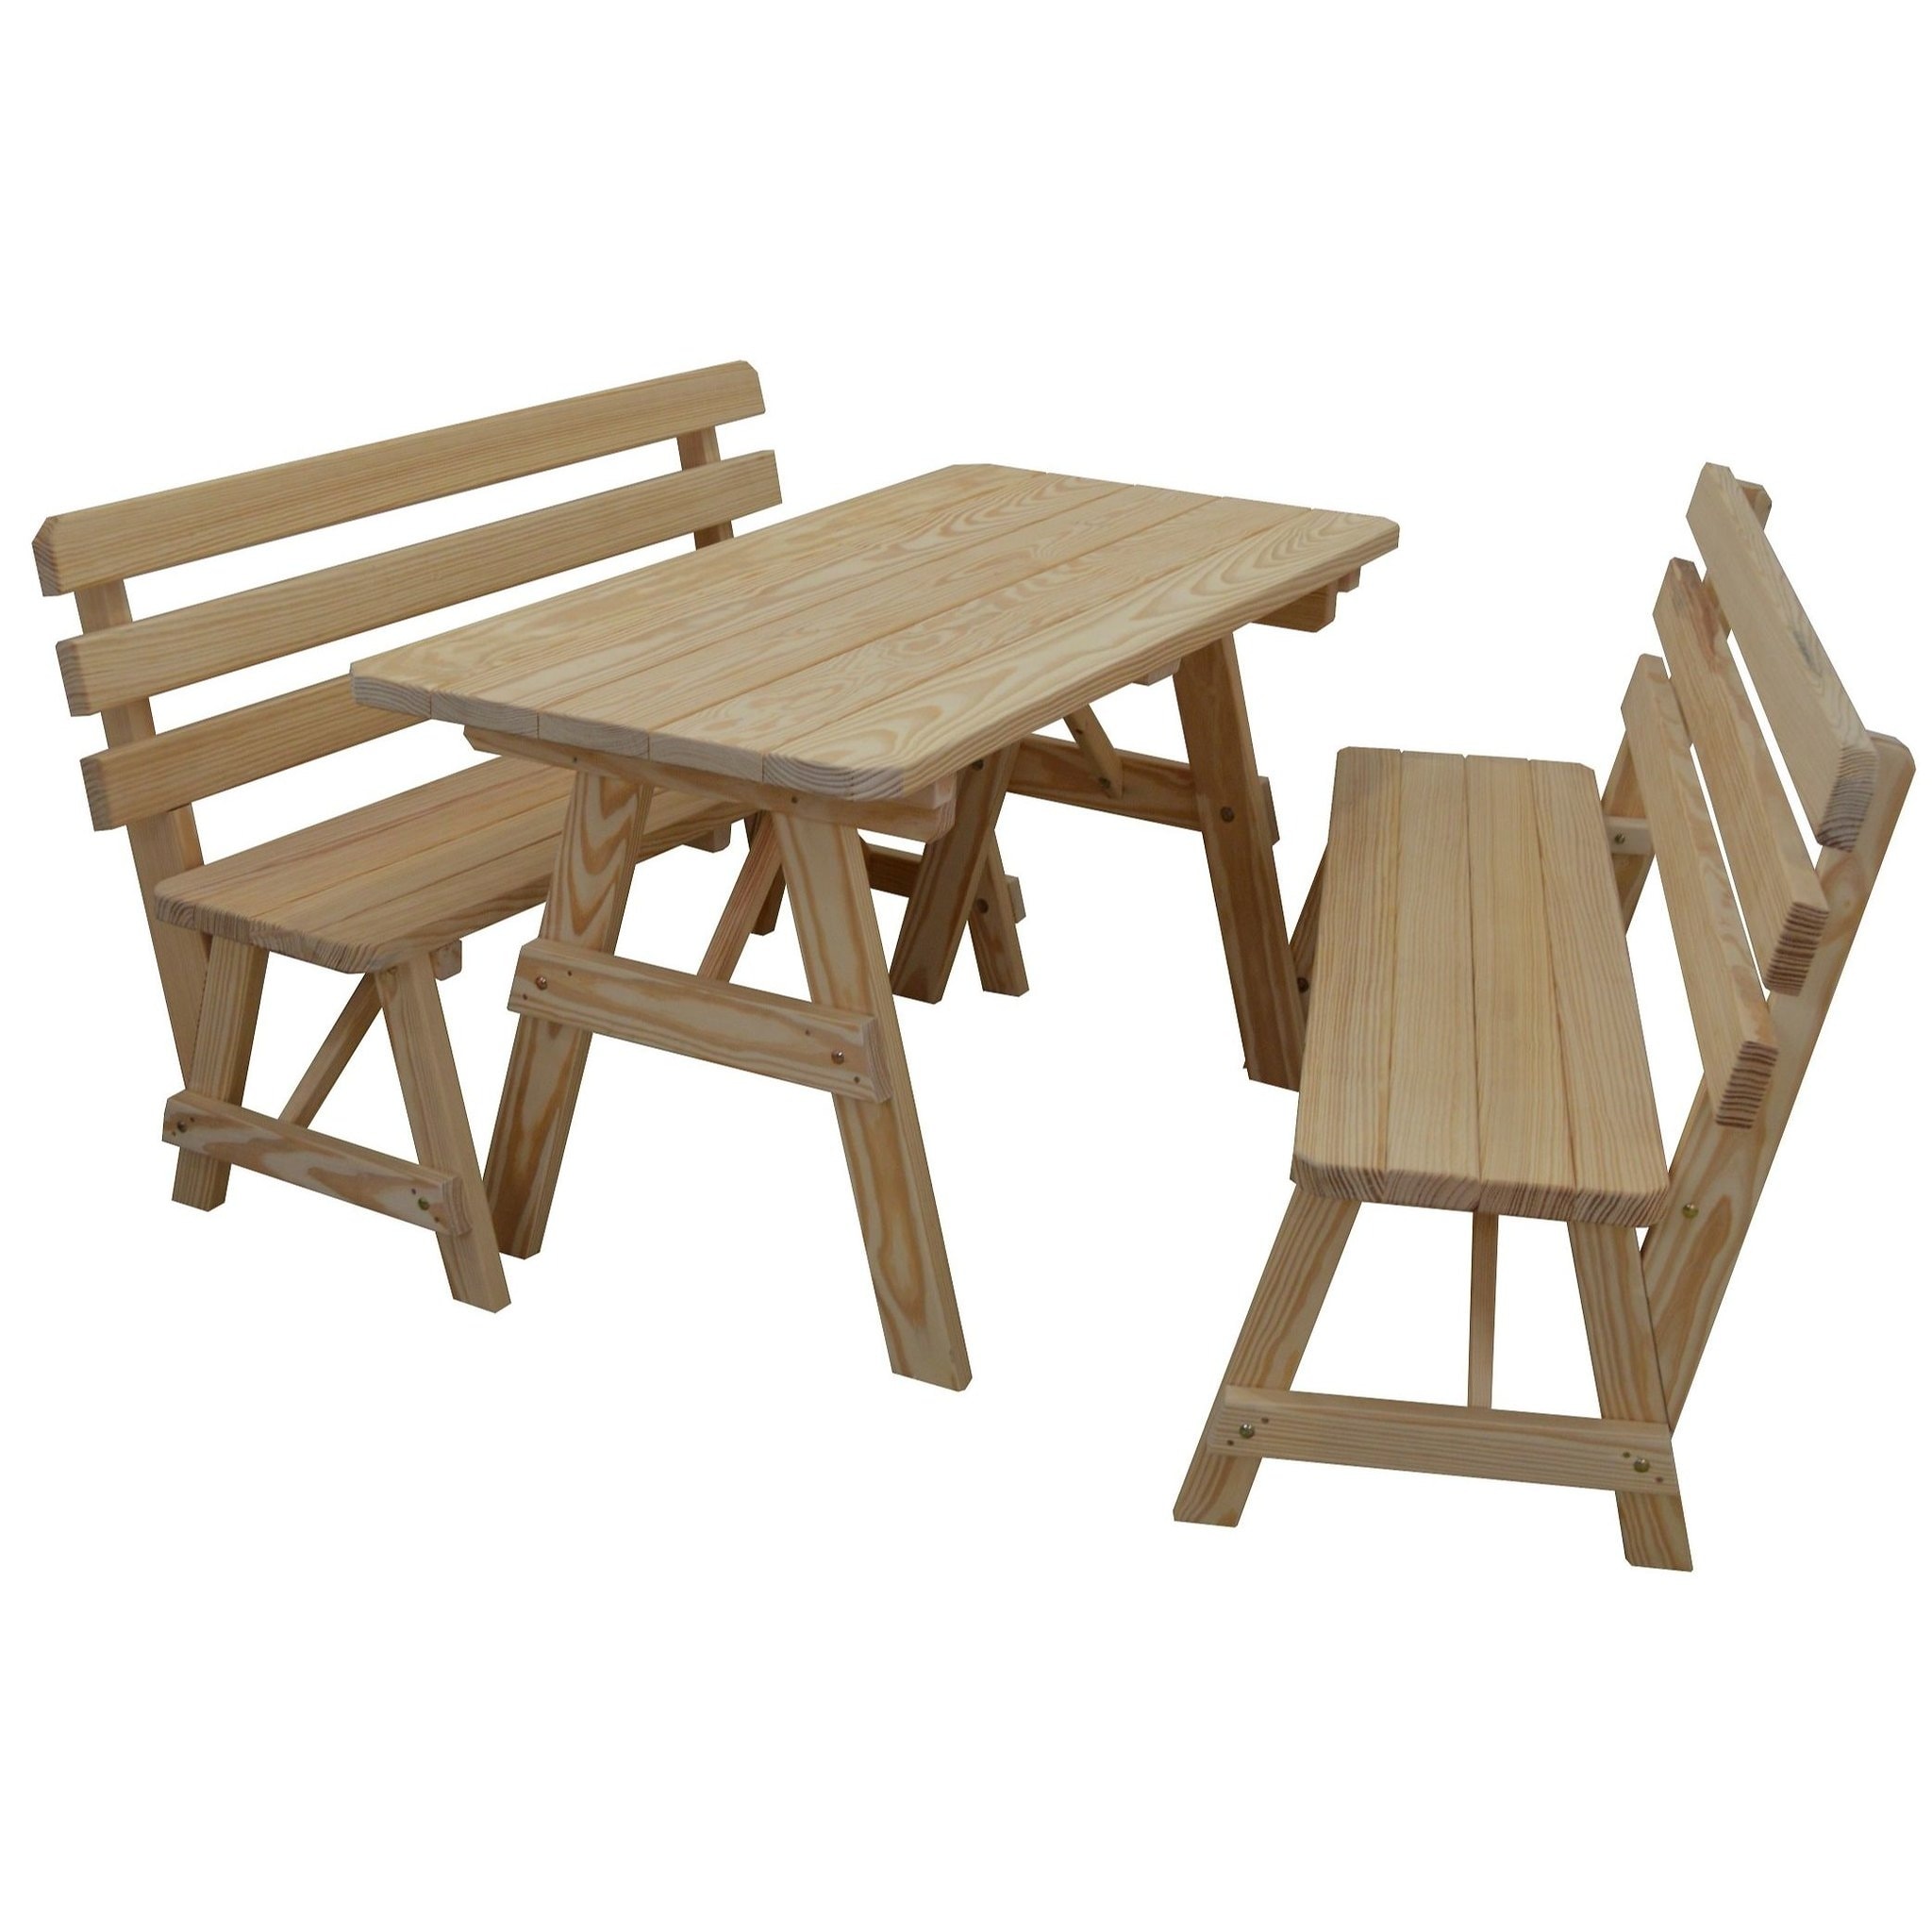 Pine 5 Picnic Table With 2 Backed Benches